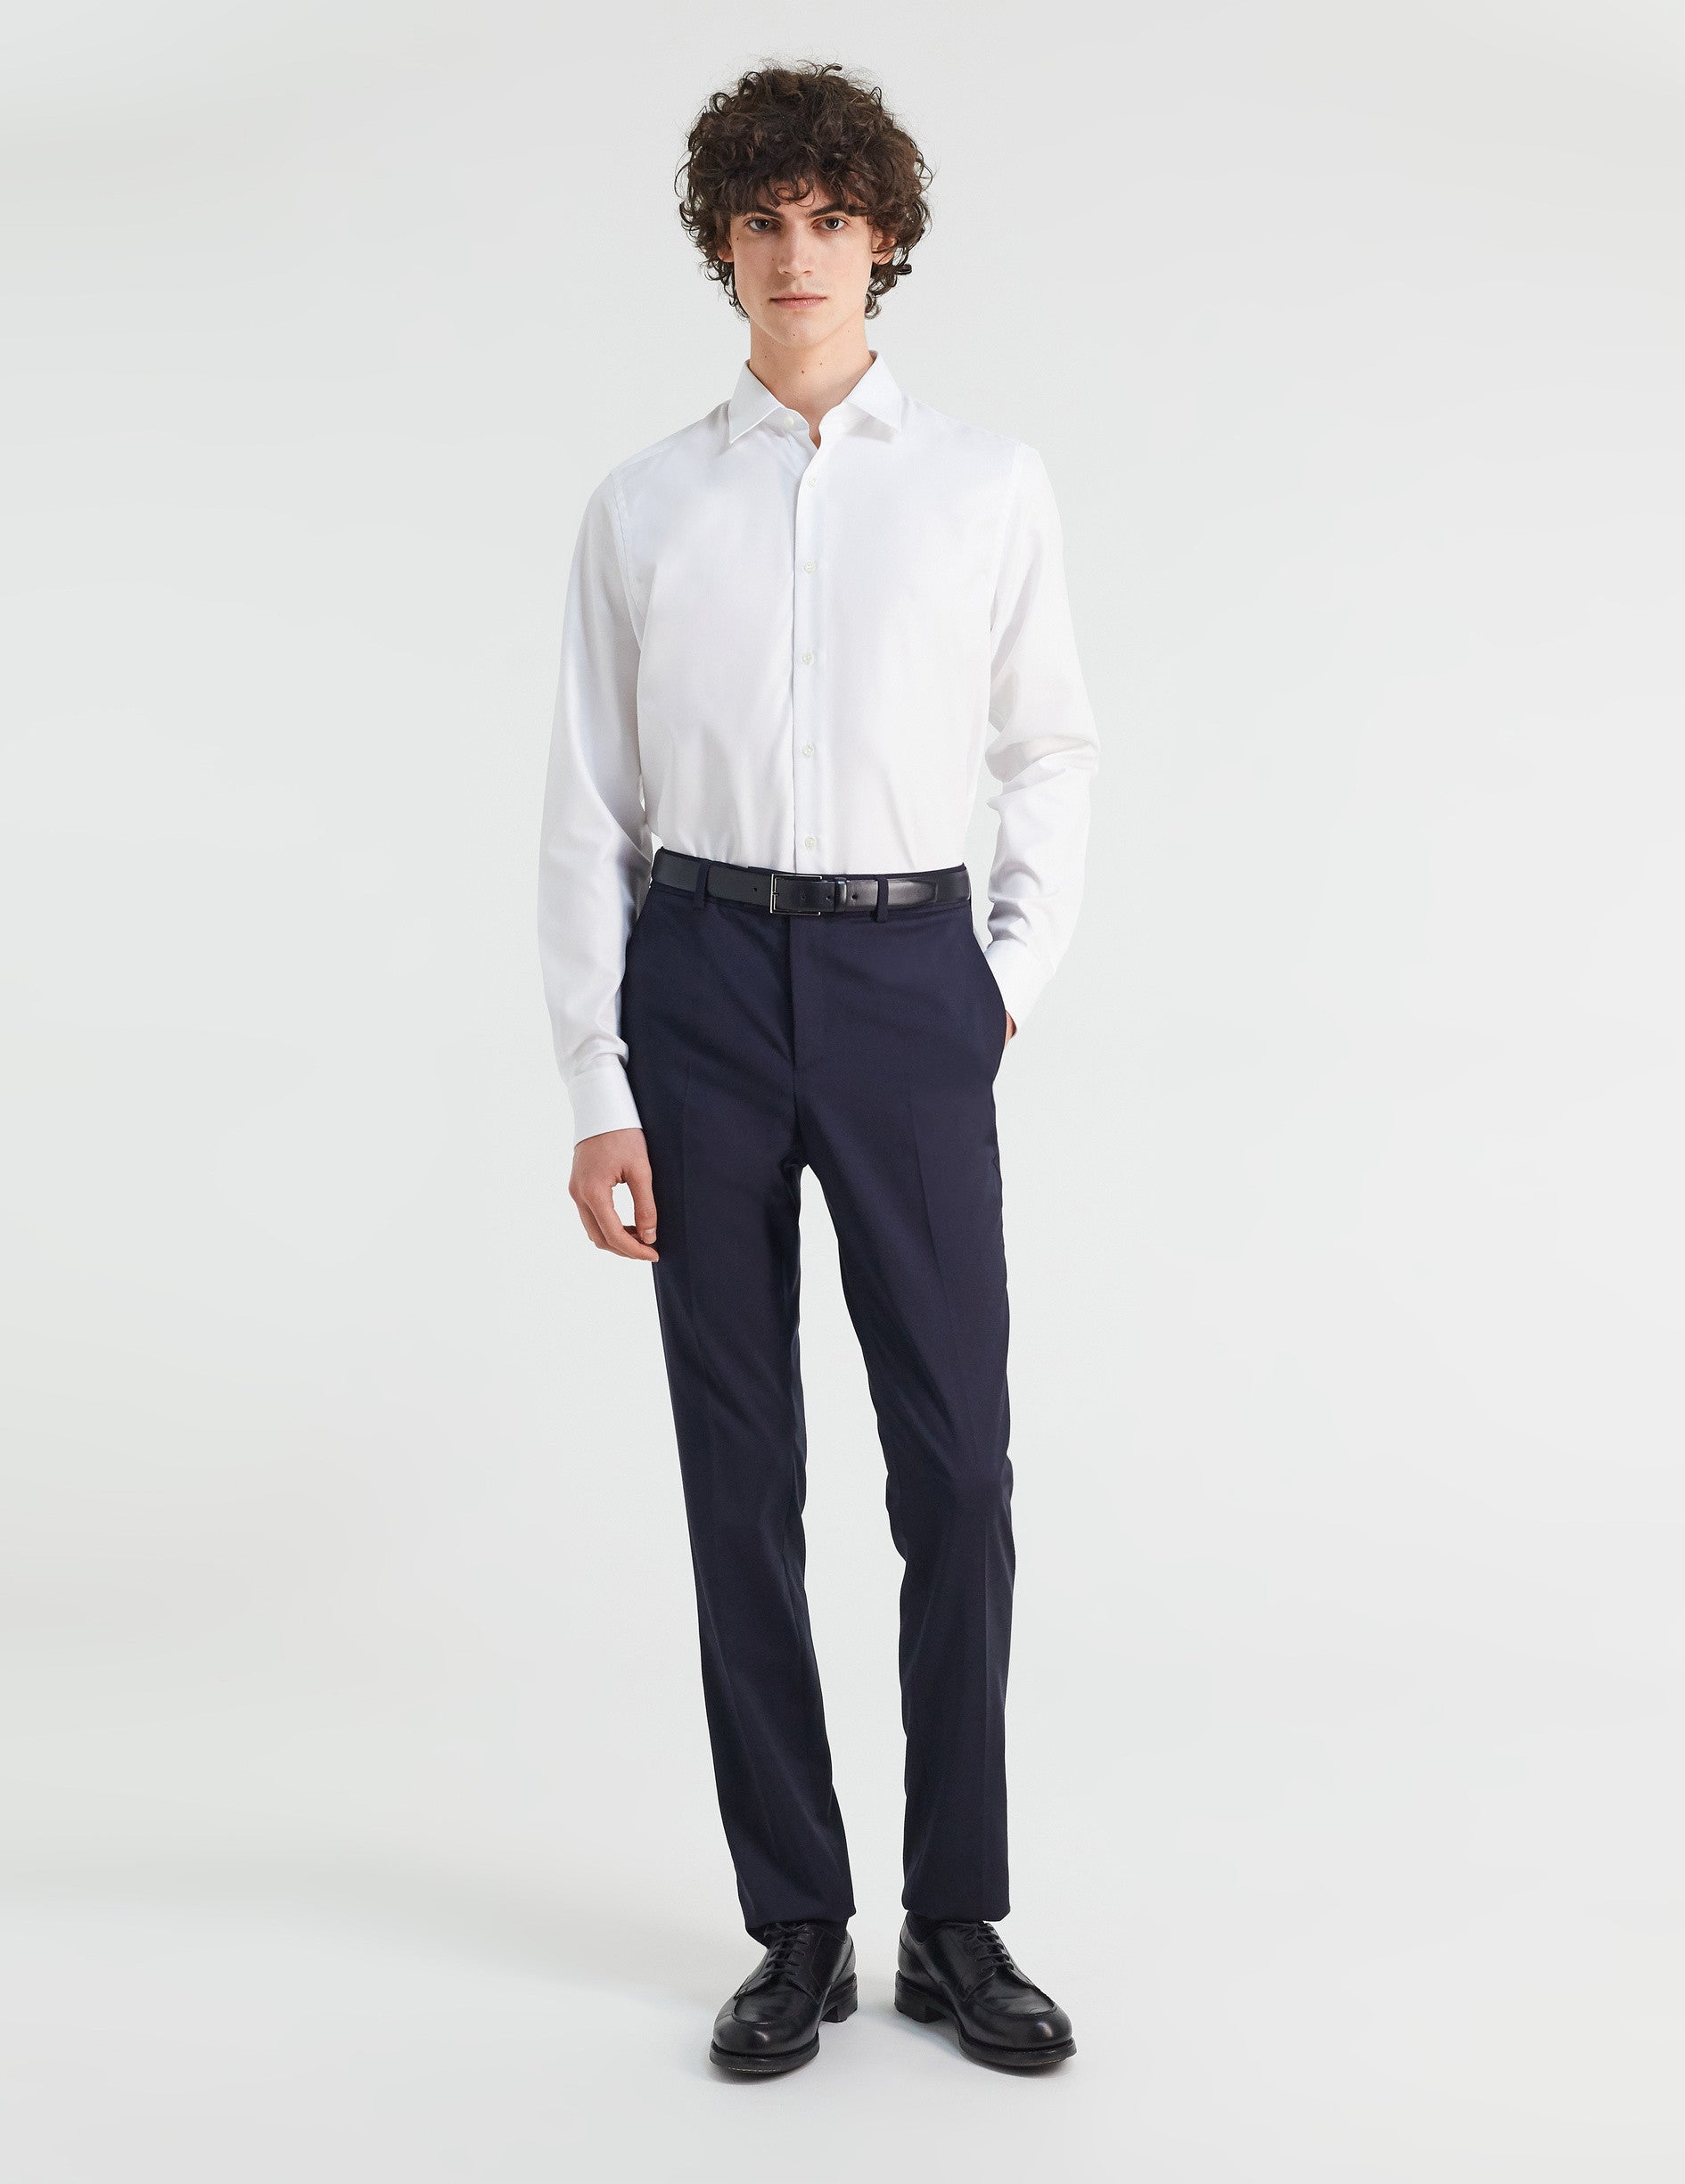 Semi-fitted white shirt - Fashioned - Figaret Collar